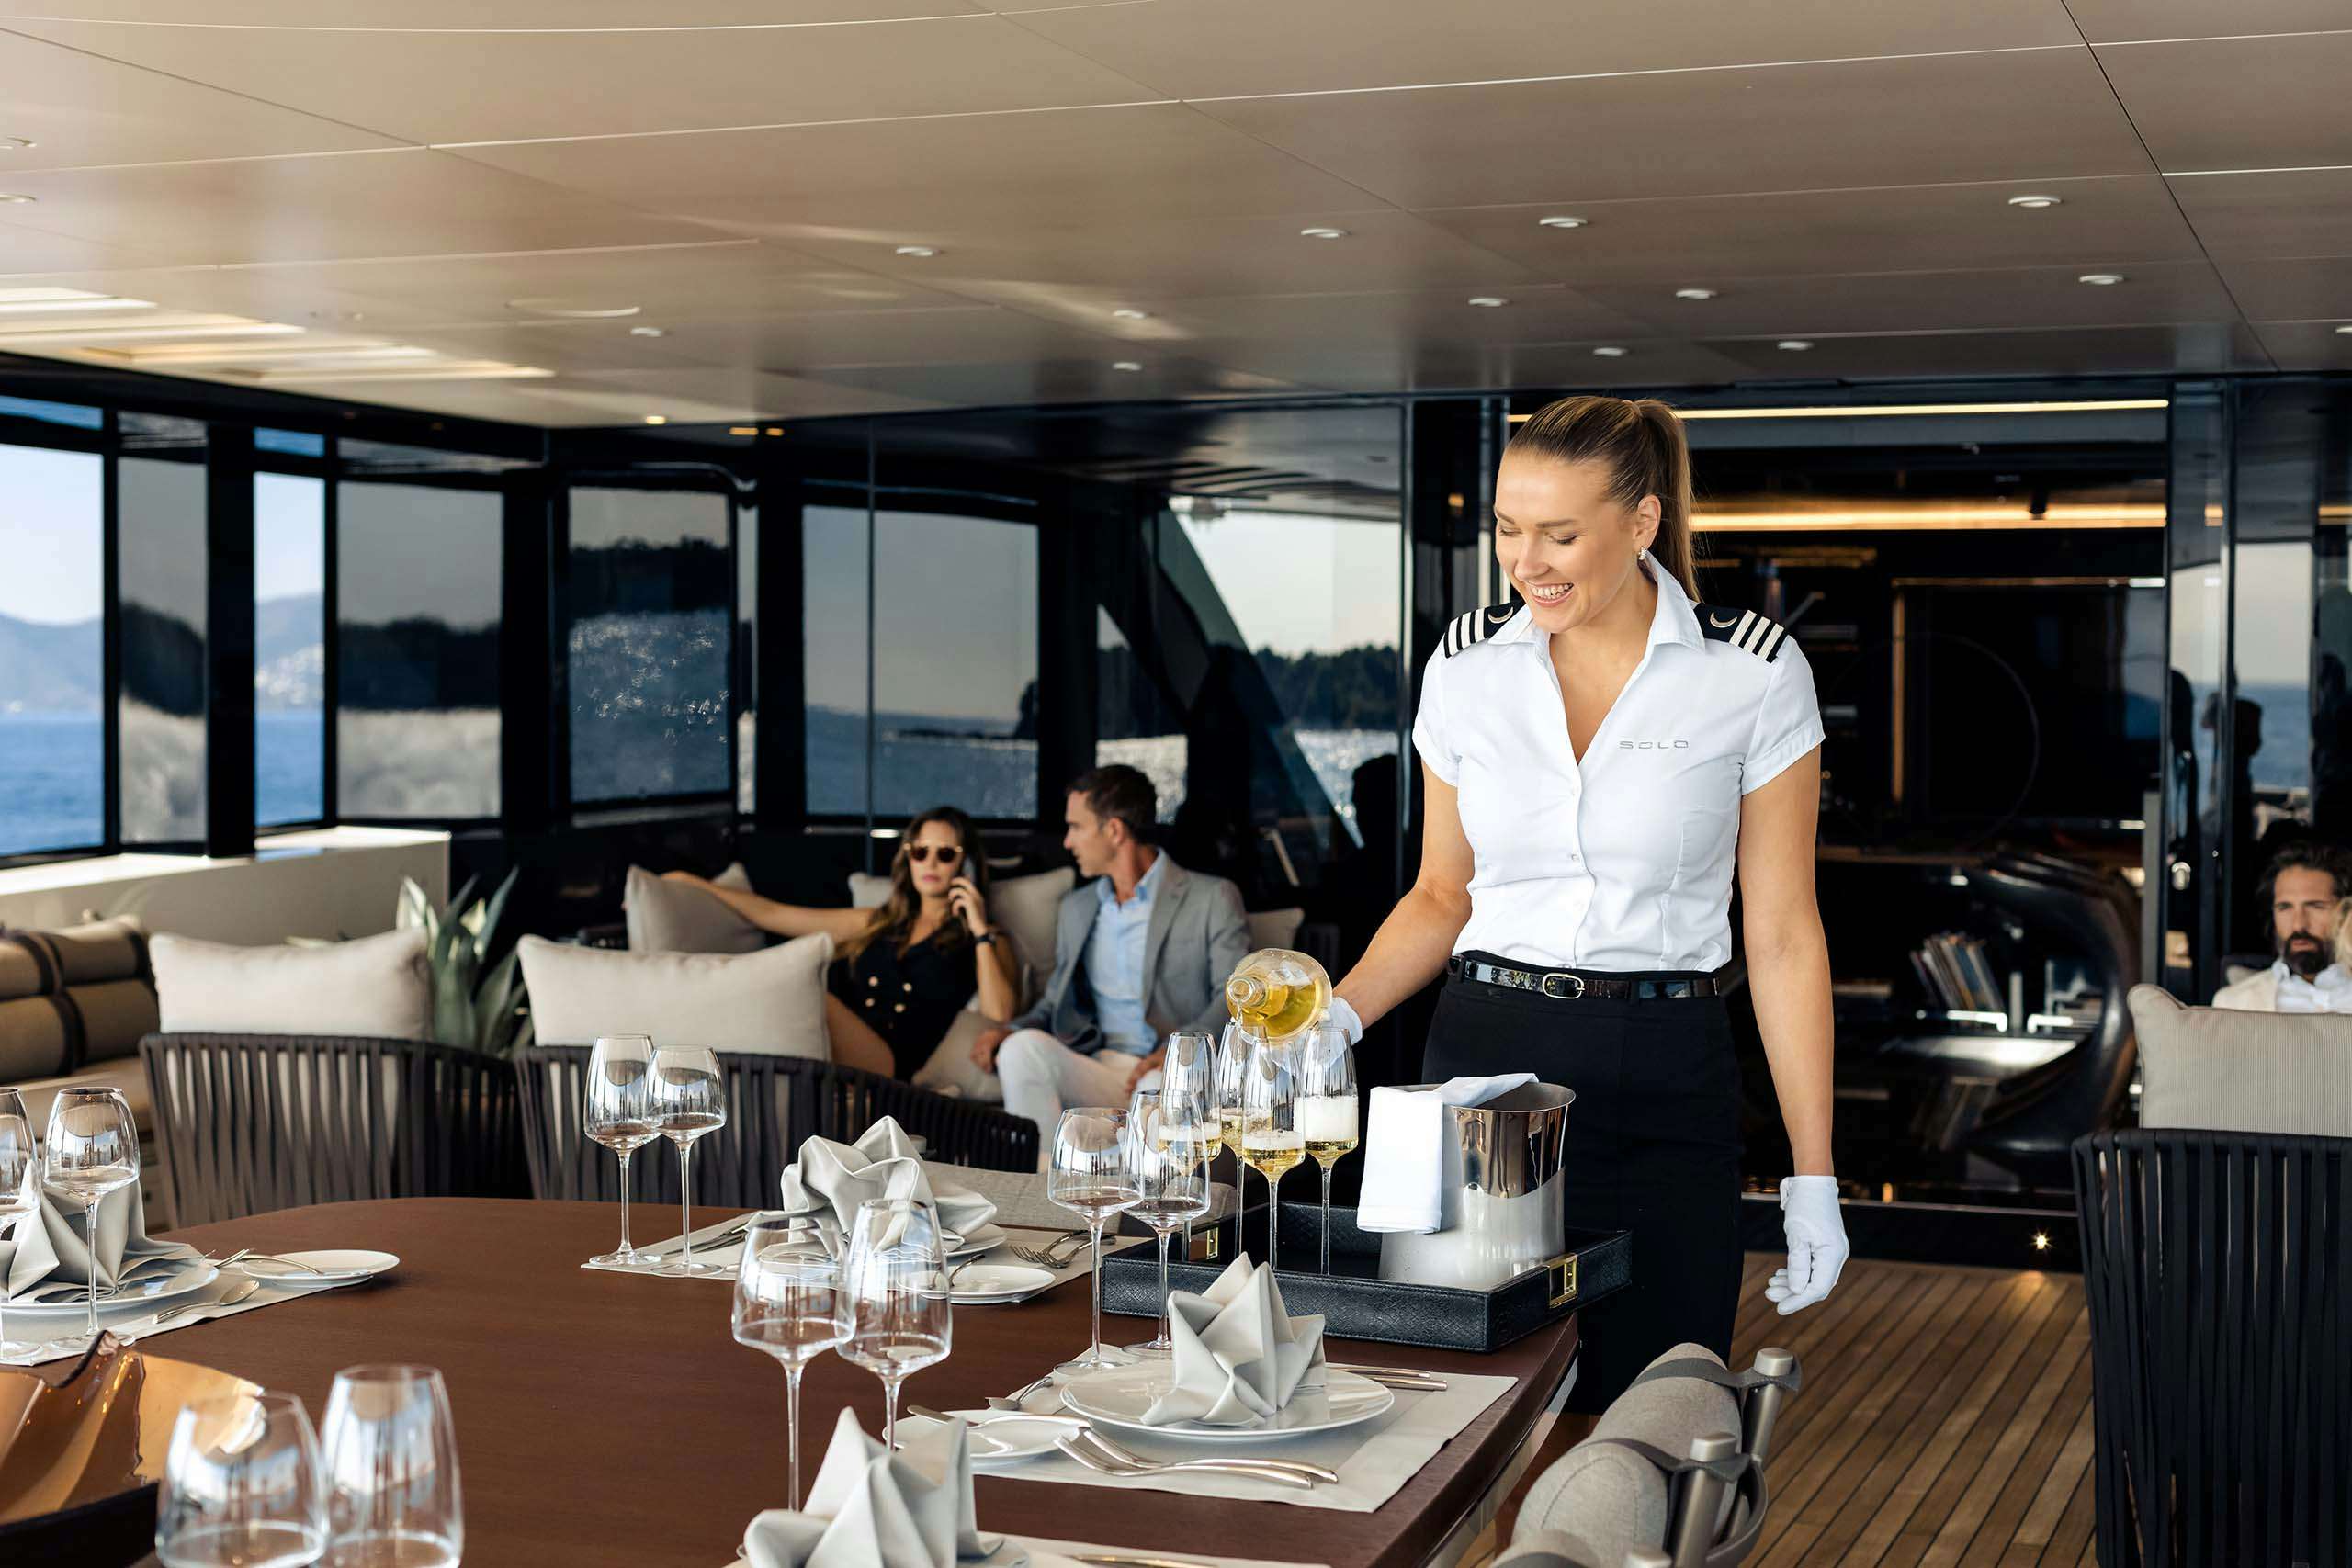 Superyacht stewardess serving wine to charter guests on aft deck